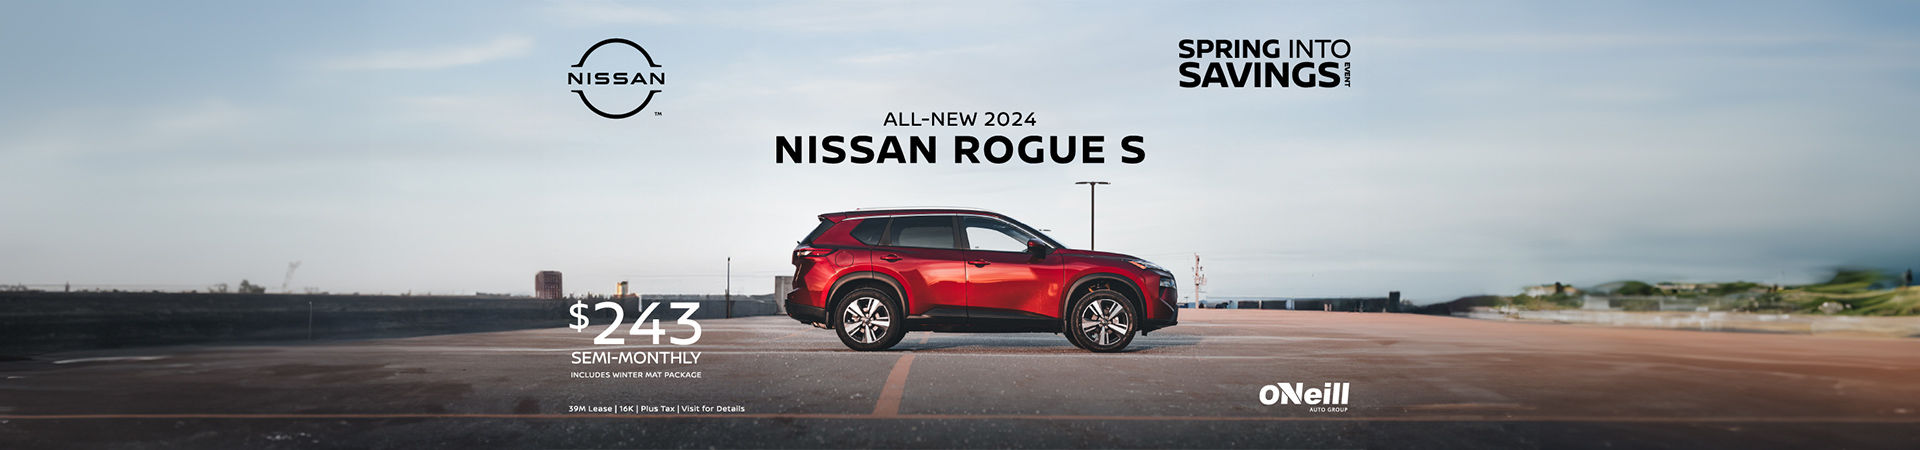 The 2024 Nissan Rogue S